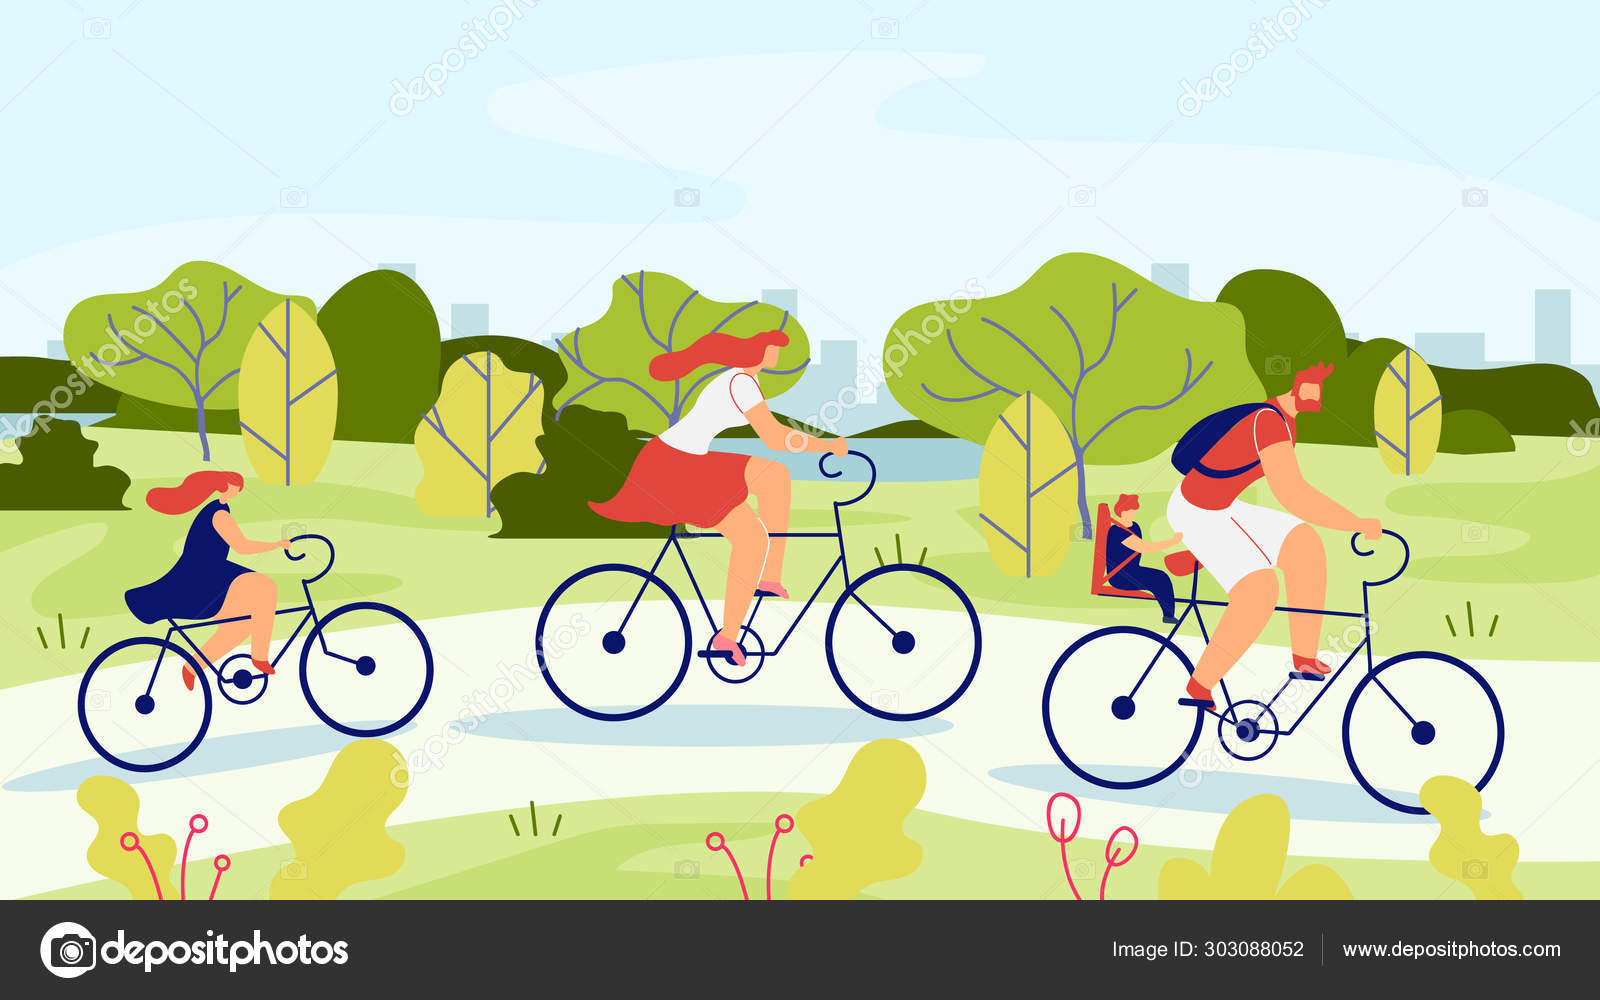 Download 4 081 Family Bike Ride Vector Images Free Royalty Free Family Bike Ride Vectors Depositphotos